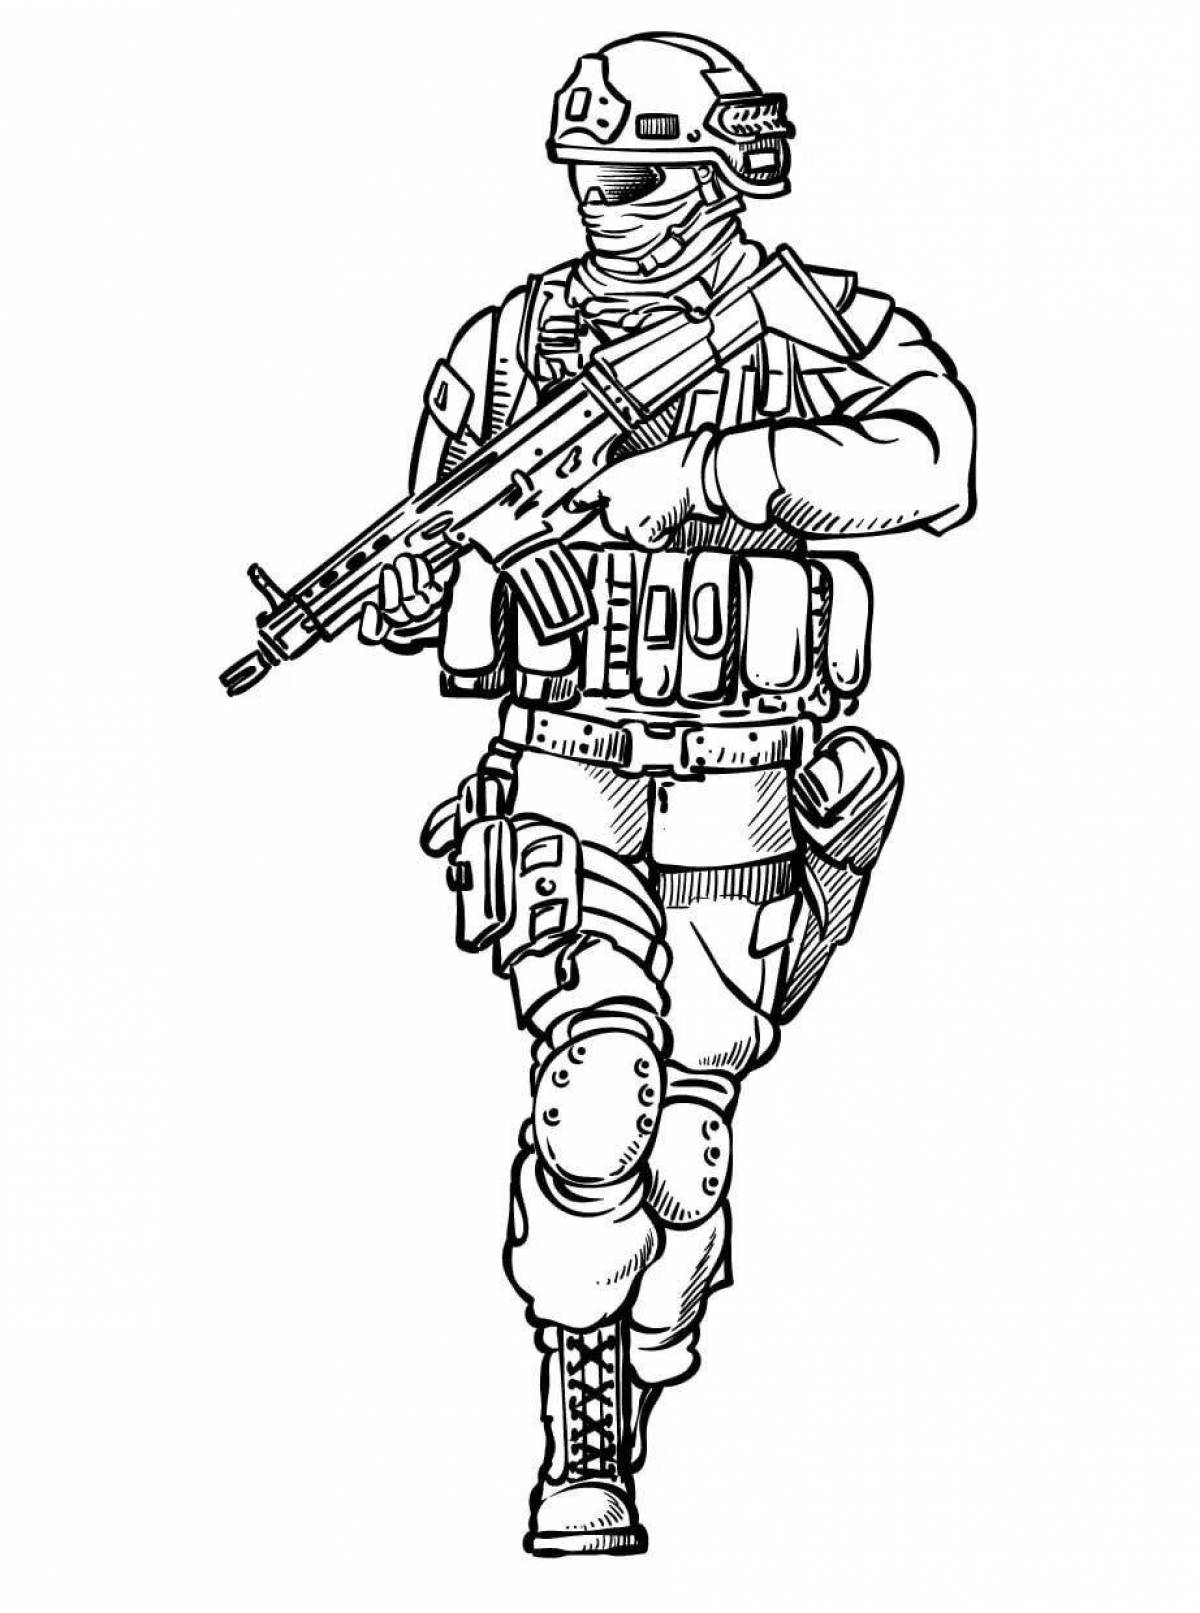 Charming soldier and children's coloring book